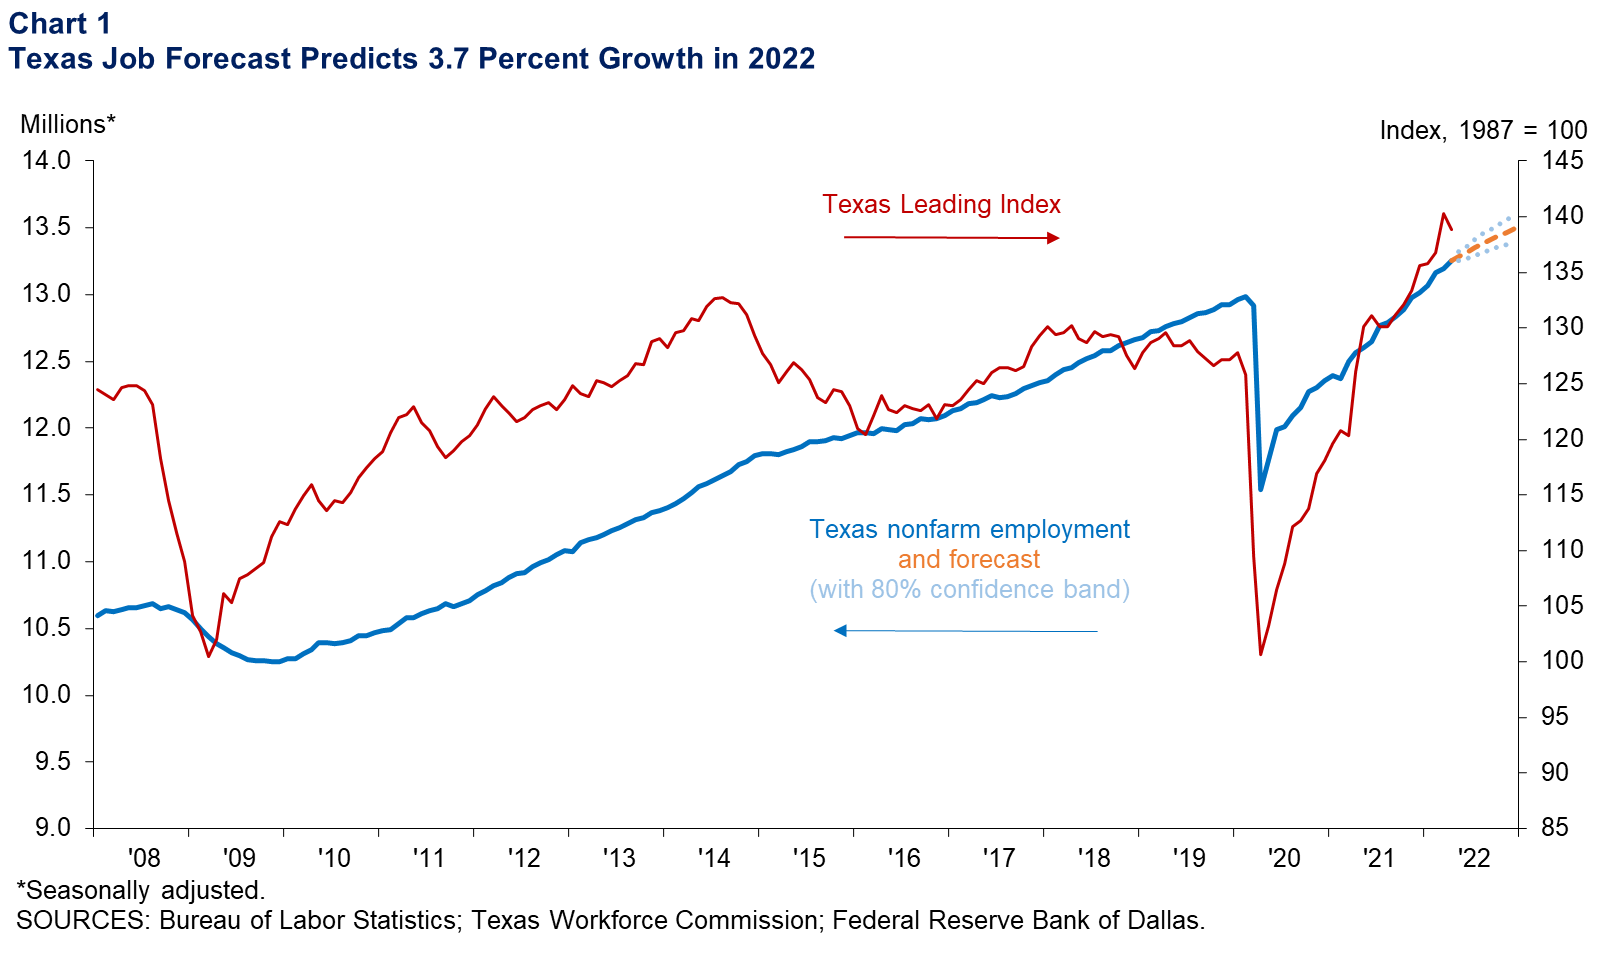 Texas Job Forecast Predicts 3.4 Percent Growth in 2022